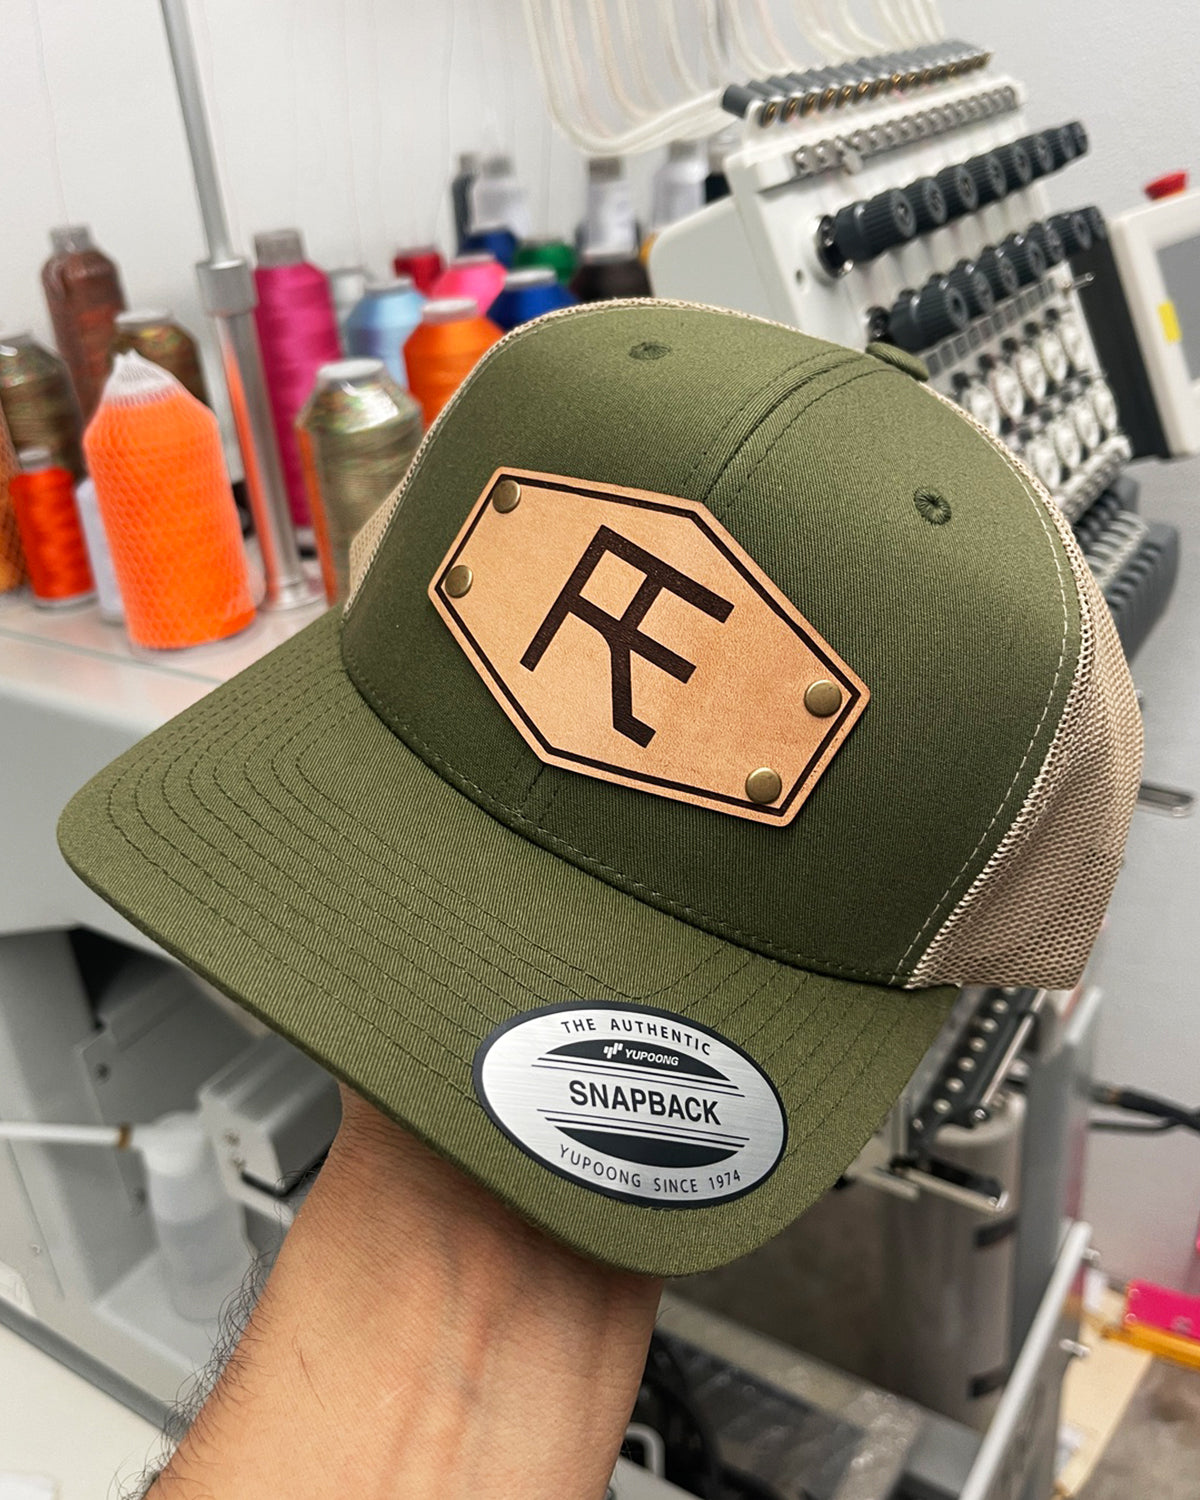 Custom Leather Patches Engraved With Your Logo Hats - Affordable